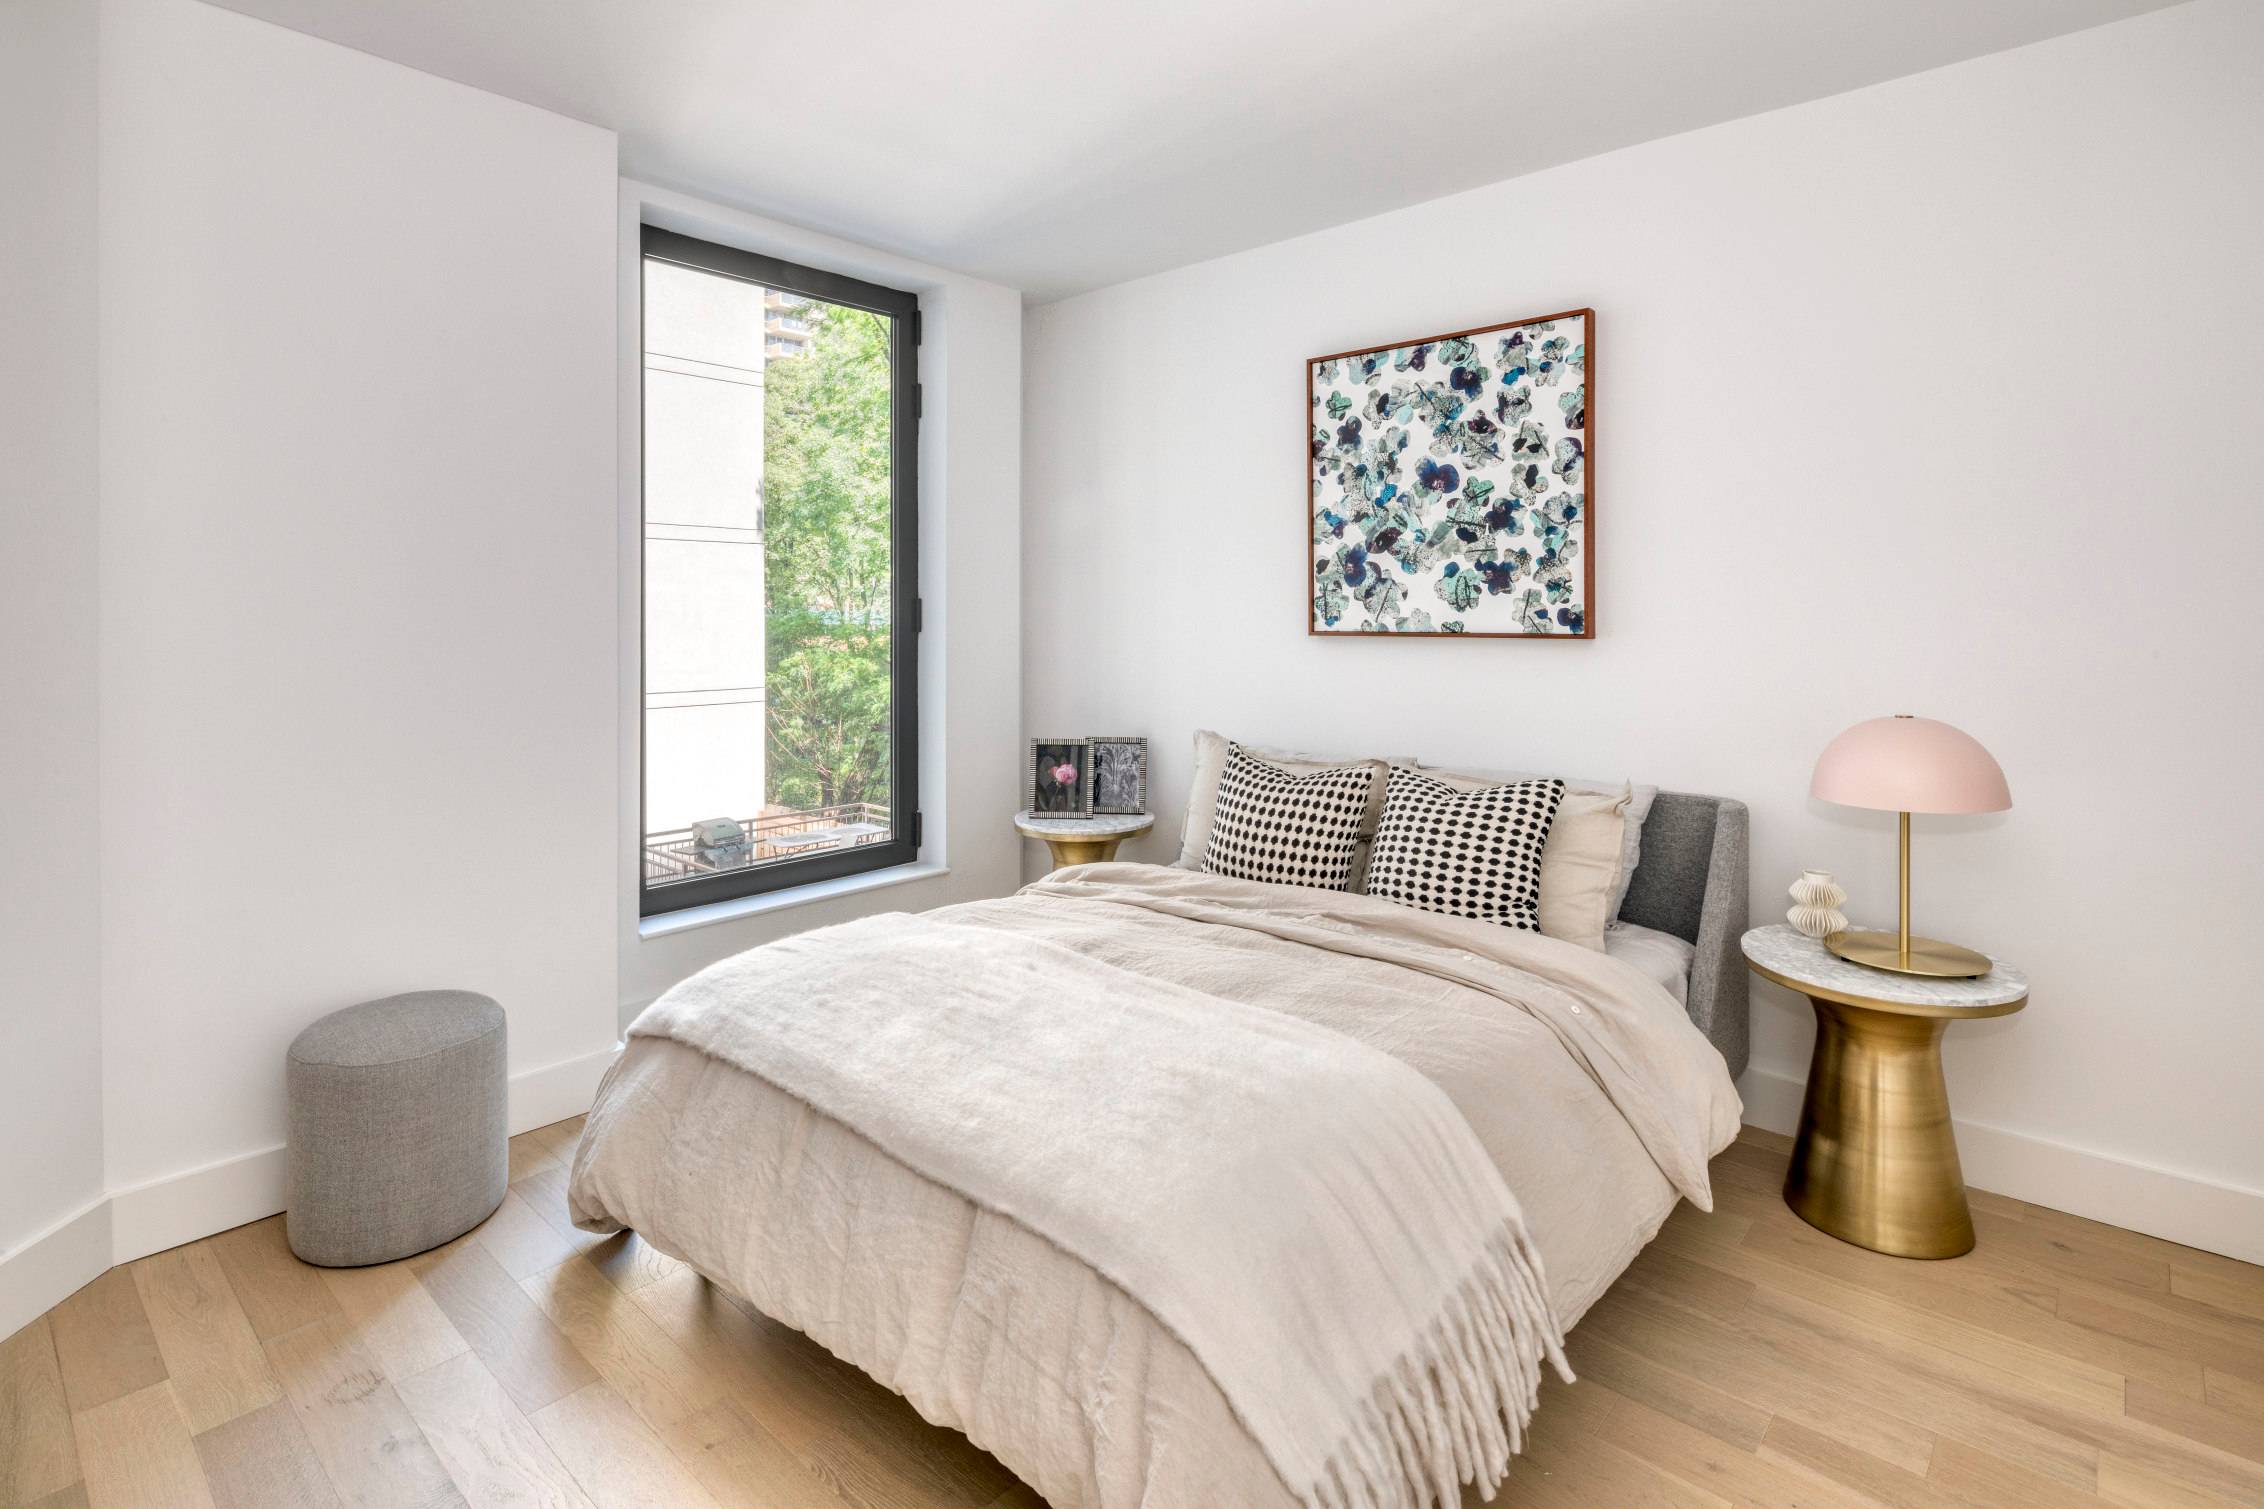 111 Montgomery, the first full service condominium in Crown Heights, is now available for immediate occupancy.